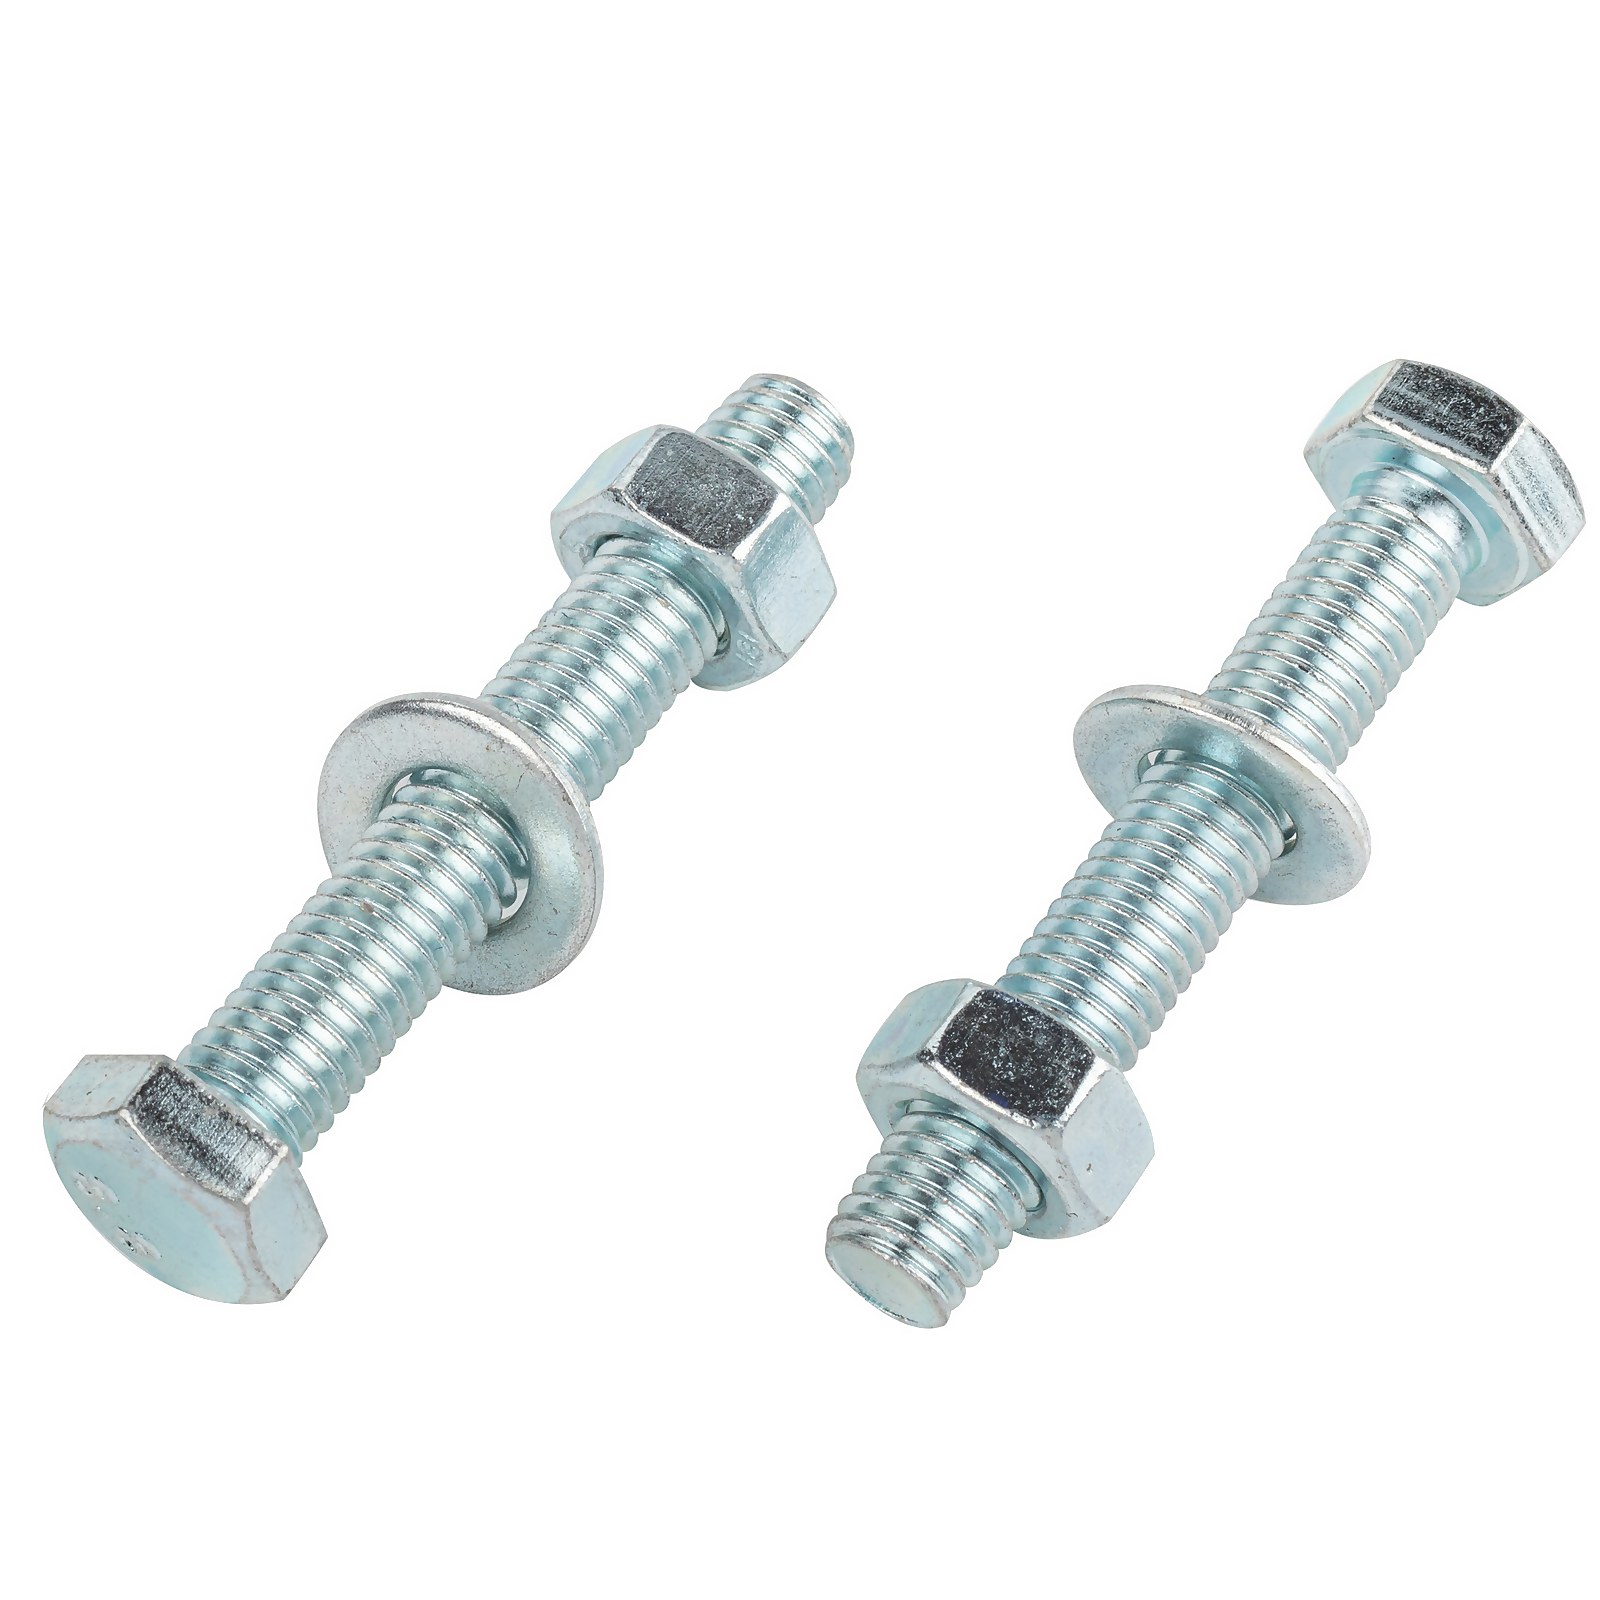 Photo of Homebase Zinc Plated Hex Bolt M8 50mm 10 Pack